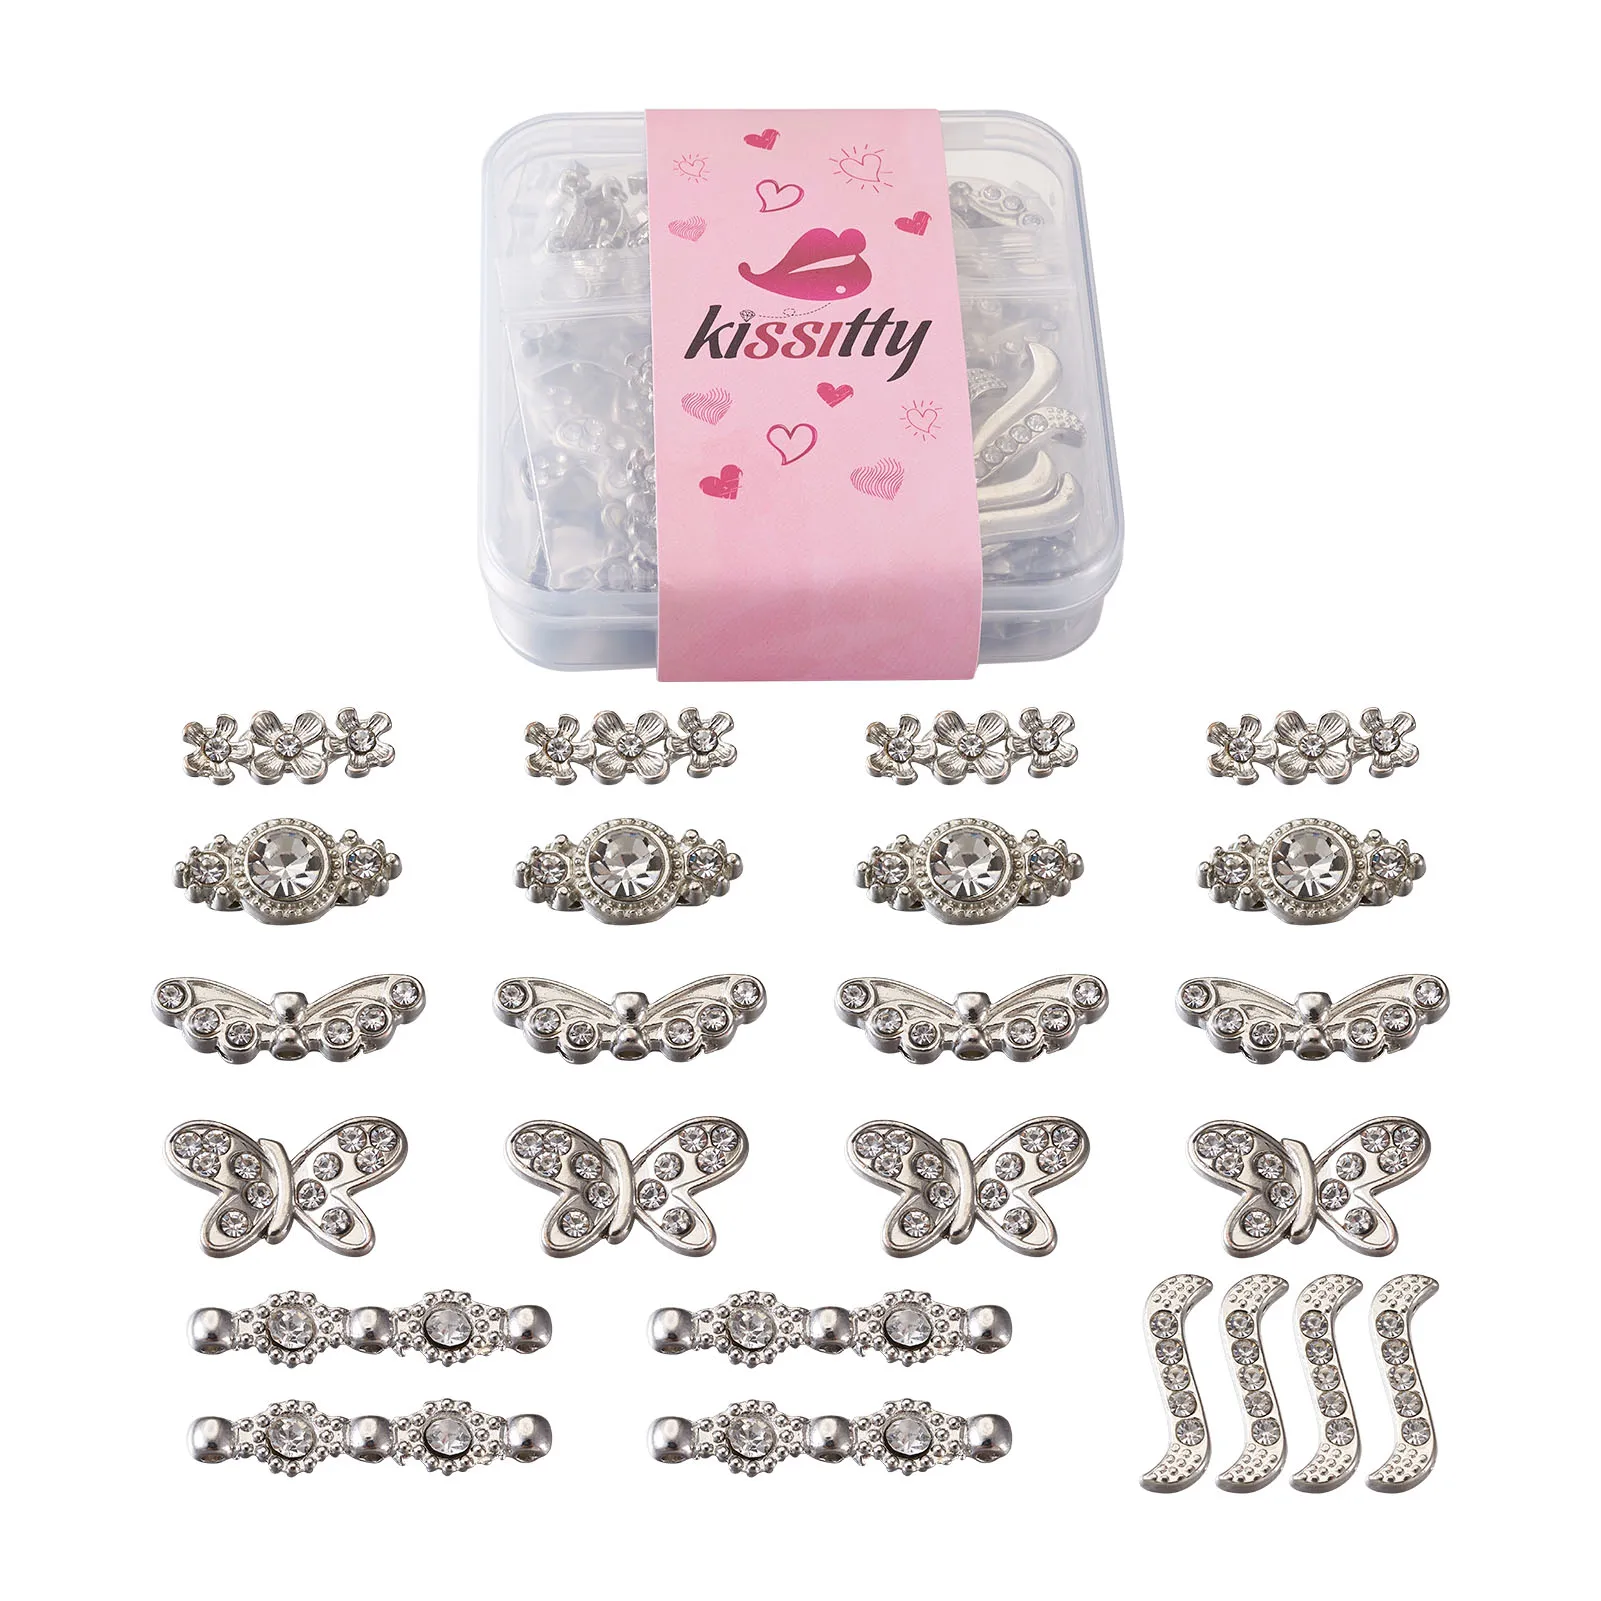 

60Pcs Butterfly Flower Alloy Crystal Rhinestone Spacers Bars Links Connectors for Women DIY Bracelet Jewelry Making Supplies